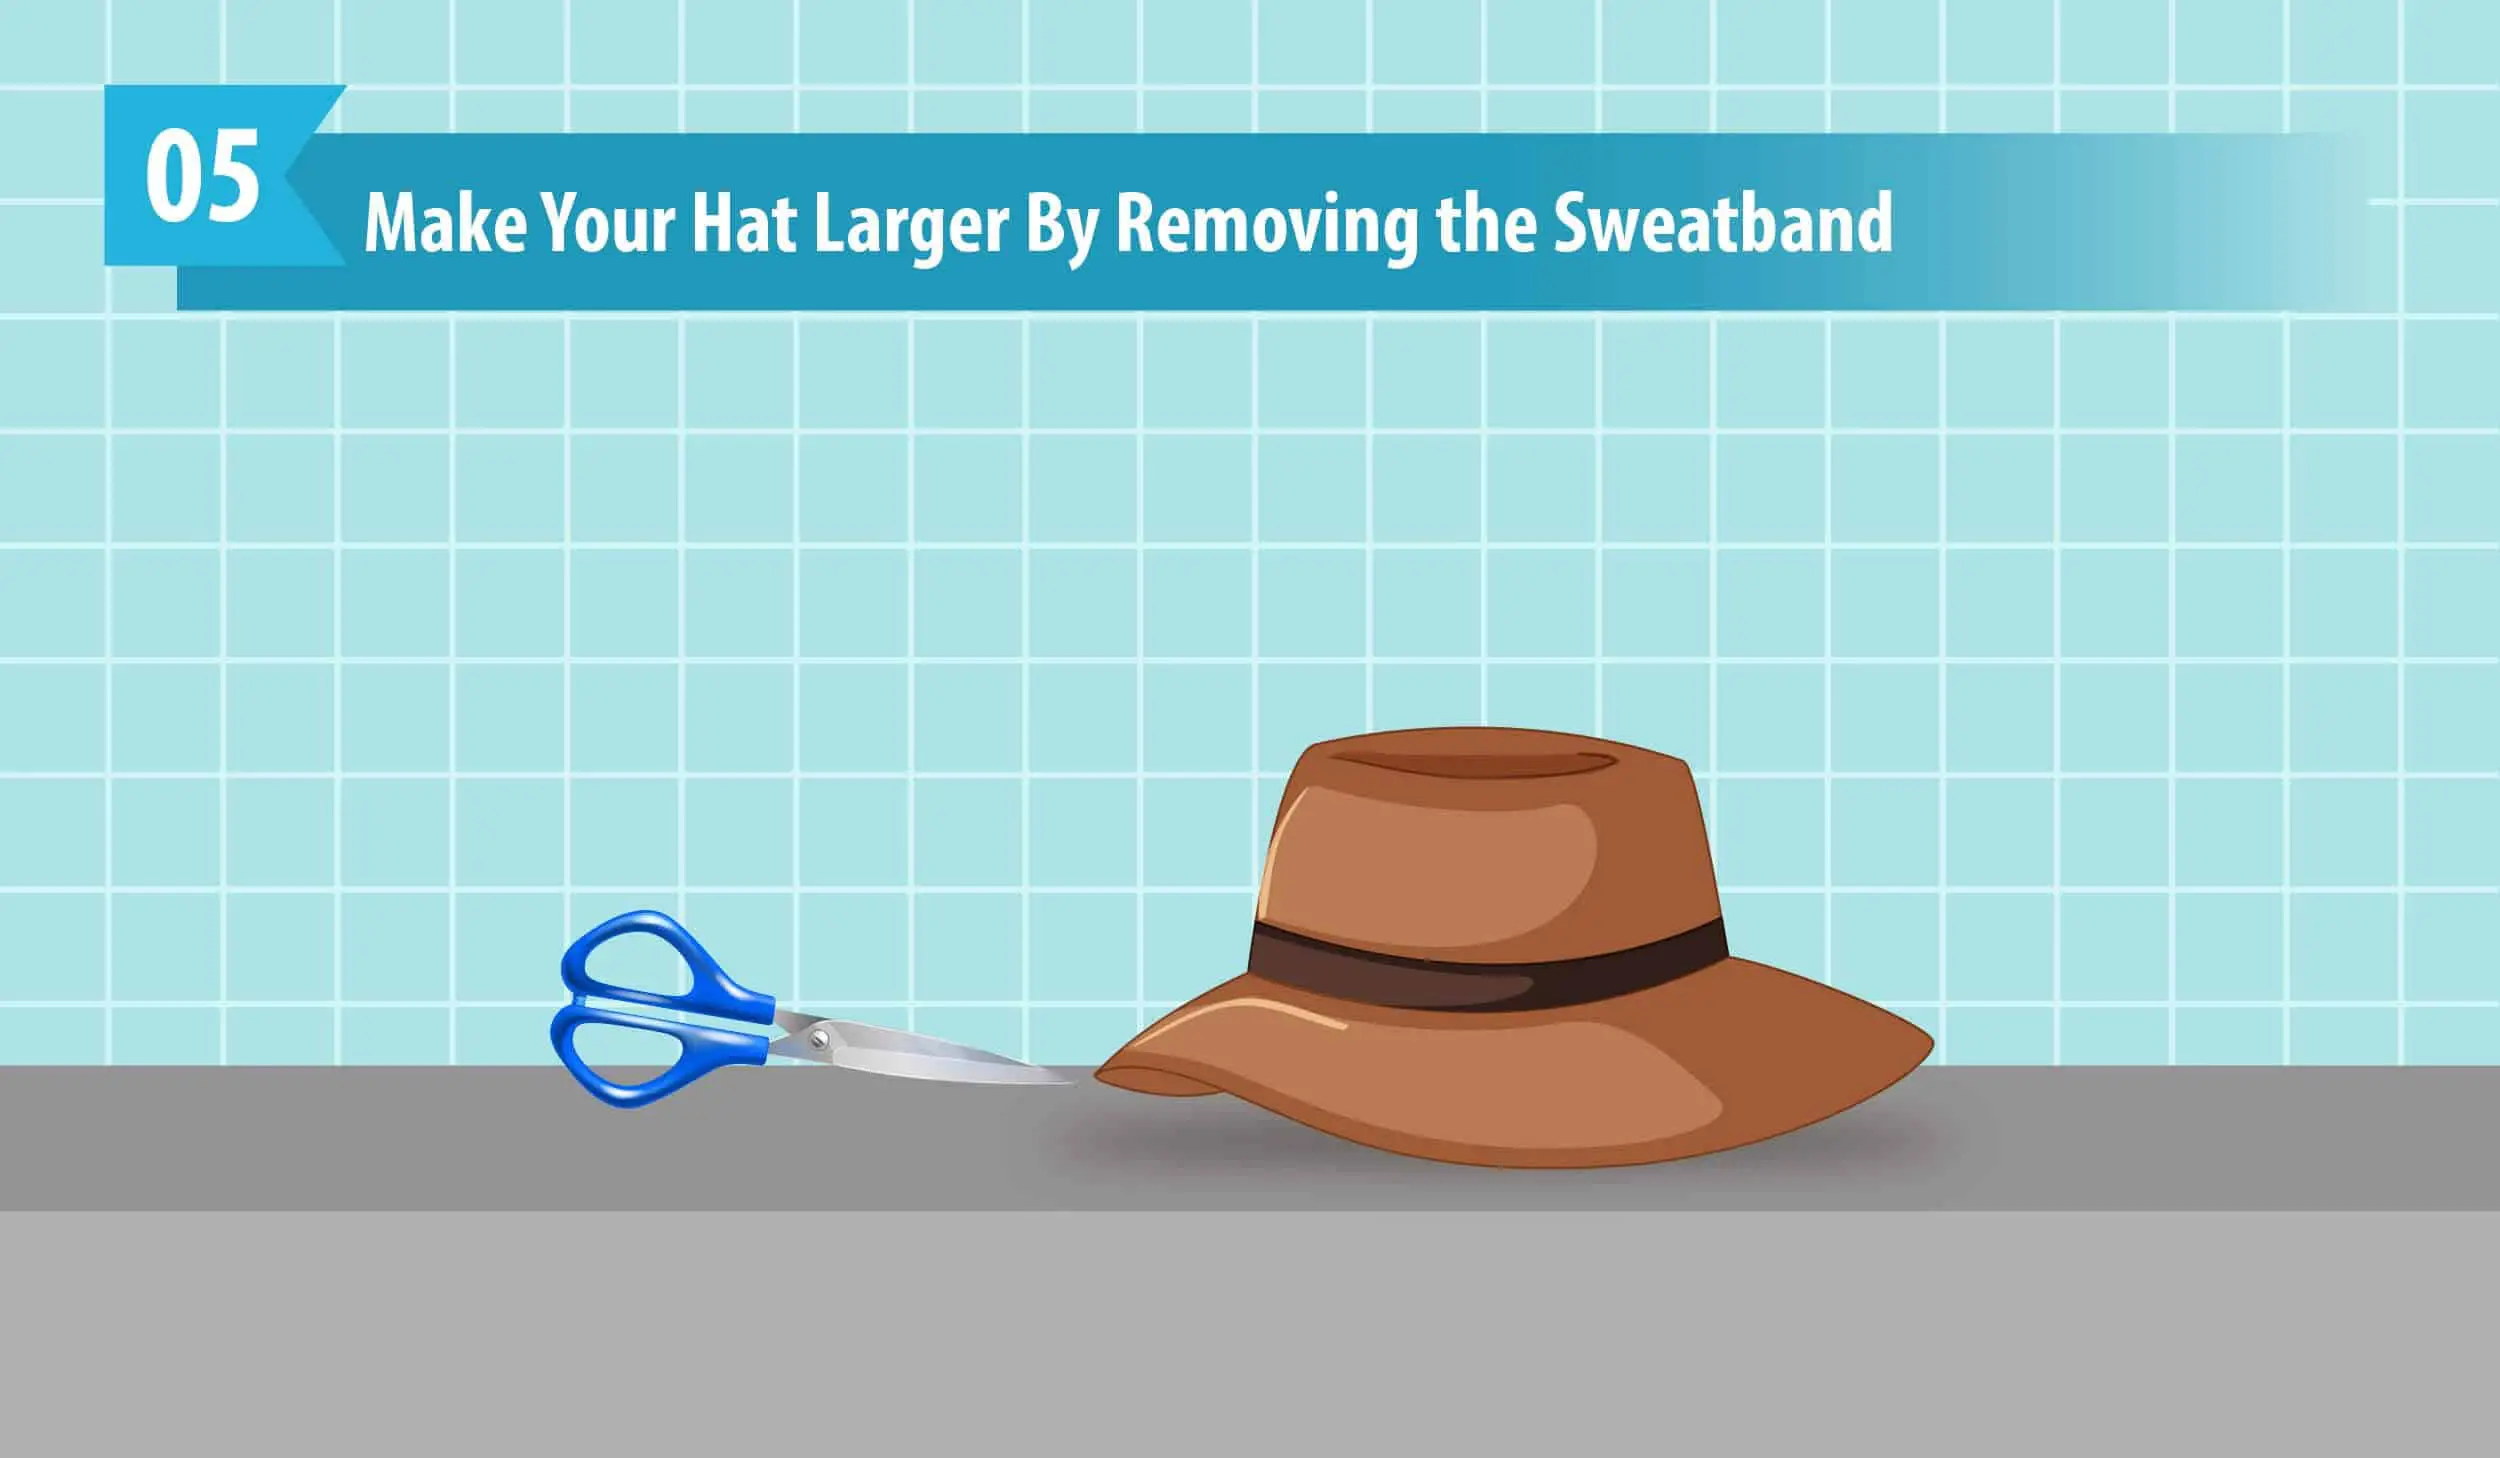 Make Your Hat Larger By Removing the Sweatband